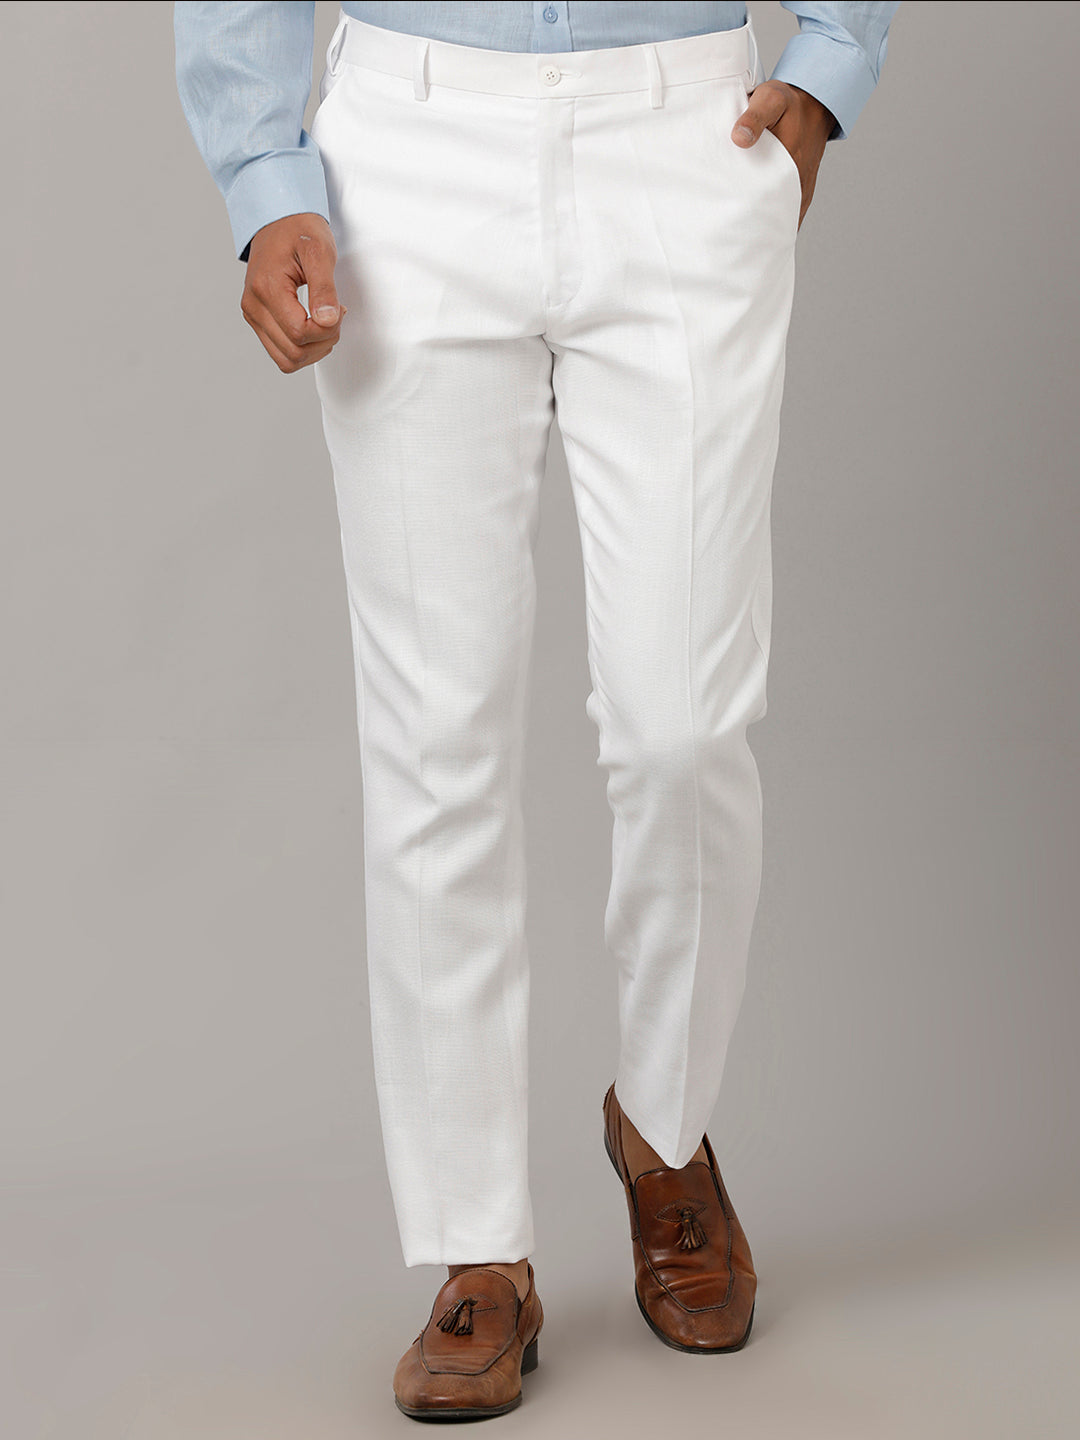 Regular Fit Casual Wear Mens White Cotton Pants, 28-36 at Rs 275